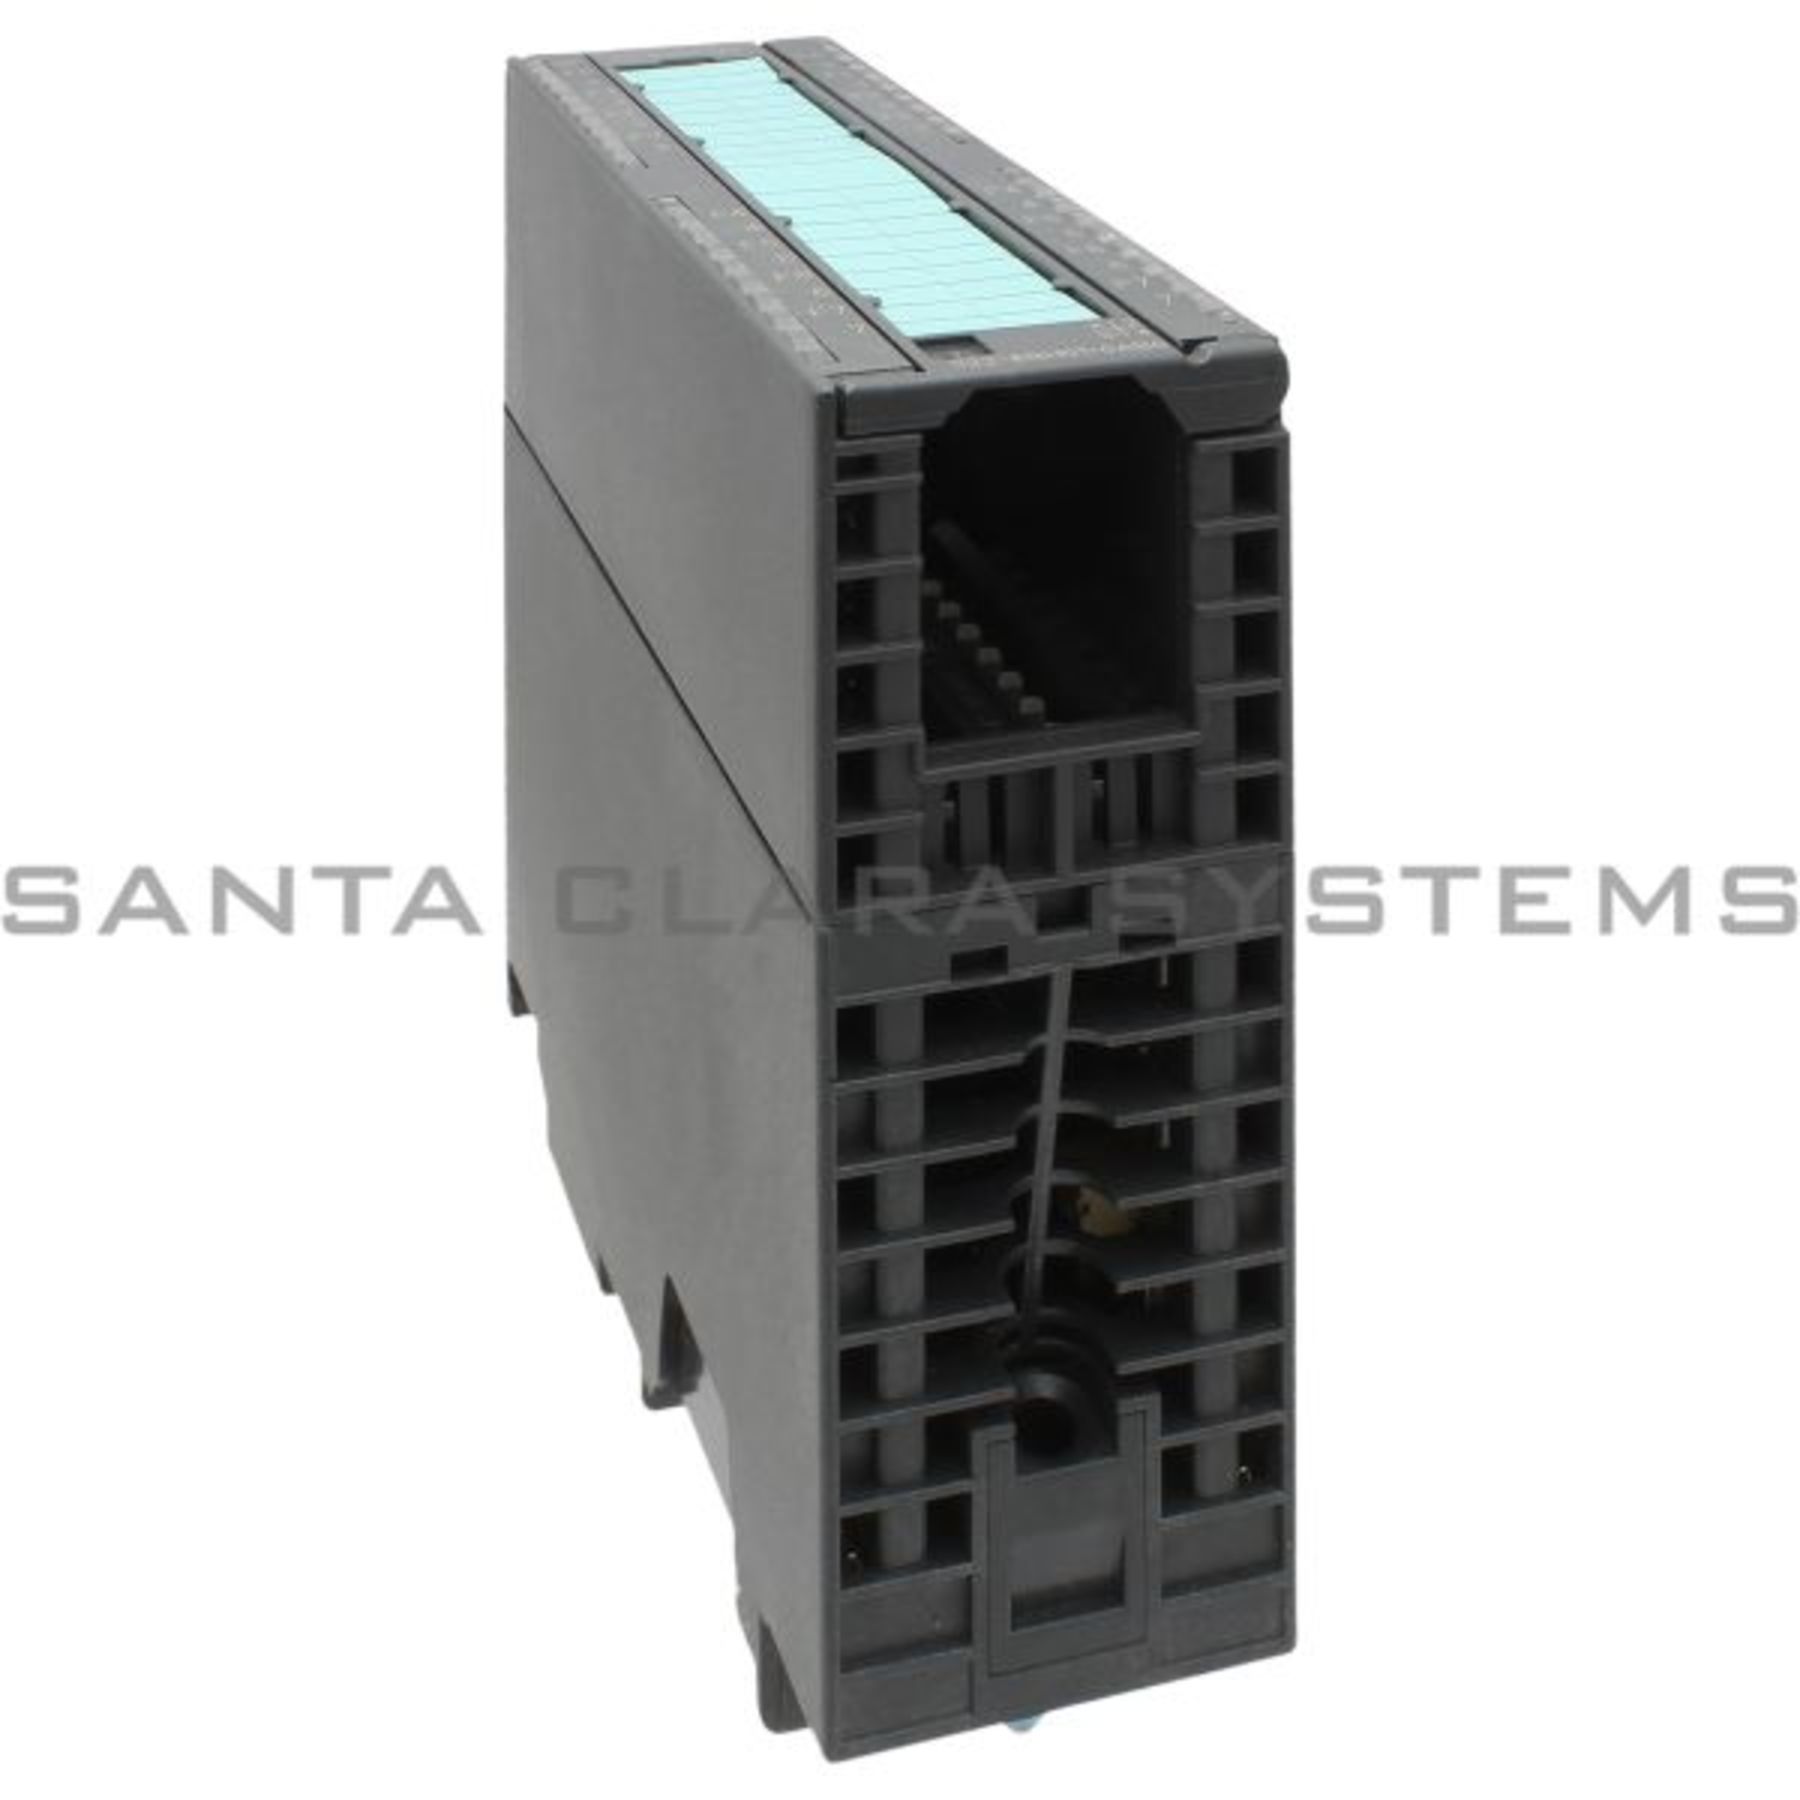 6ES7322-8BH01-0AB0 Siemens In stock and ready to ship - Santa